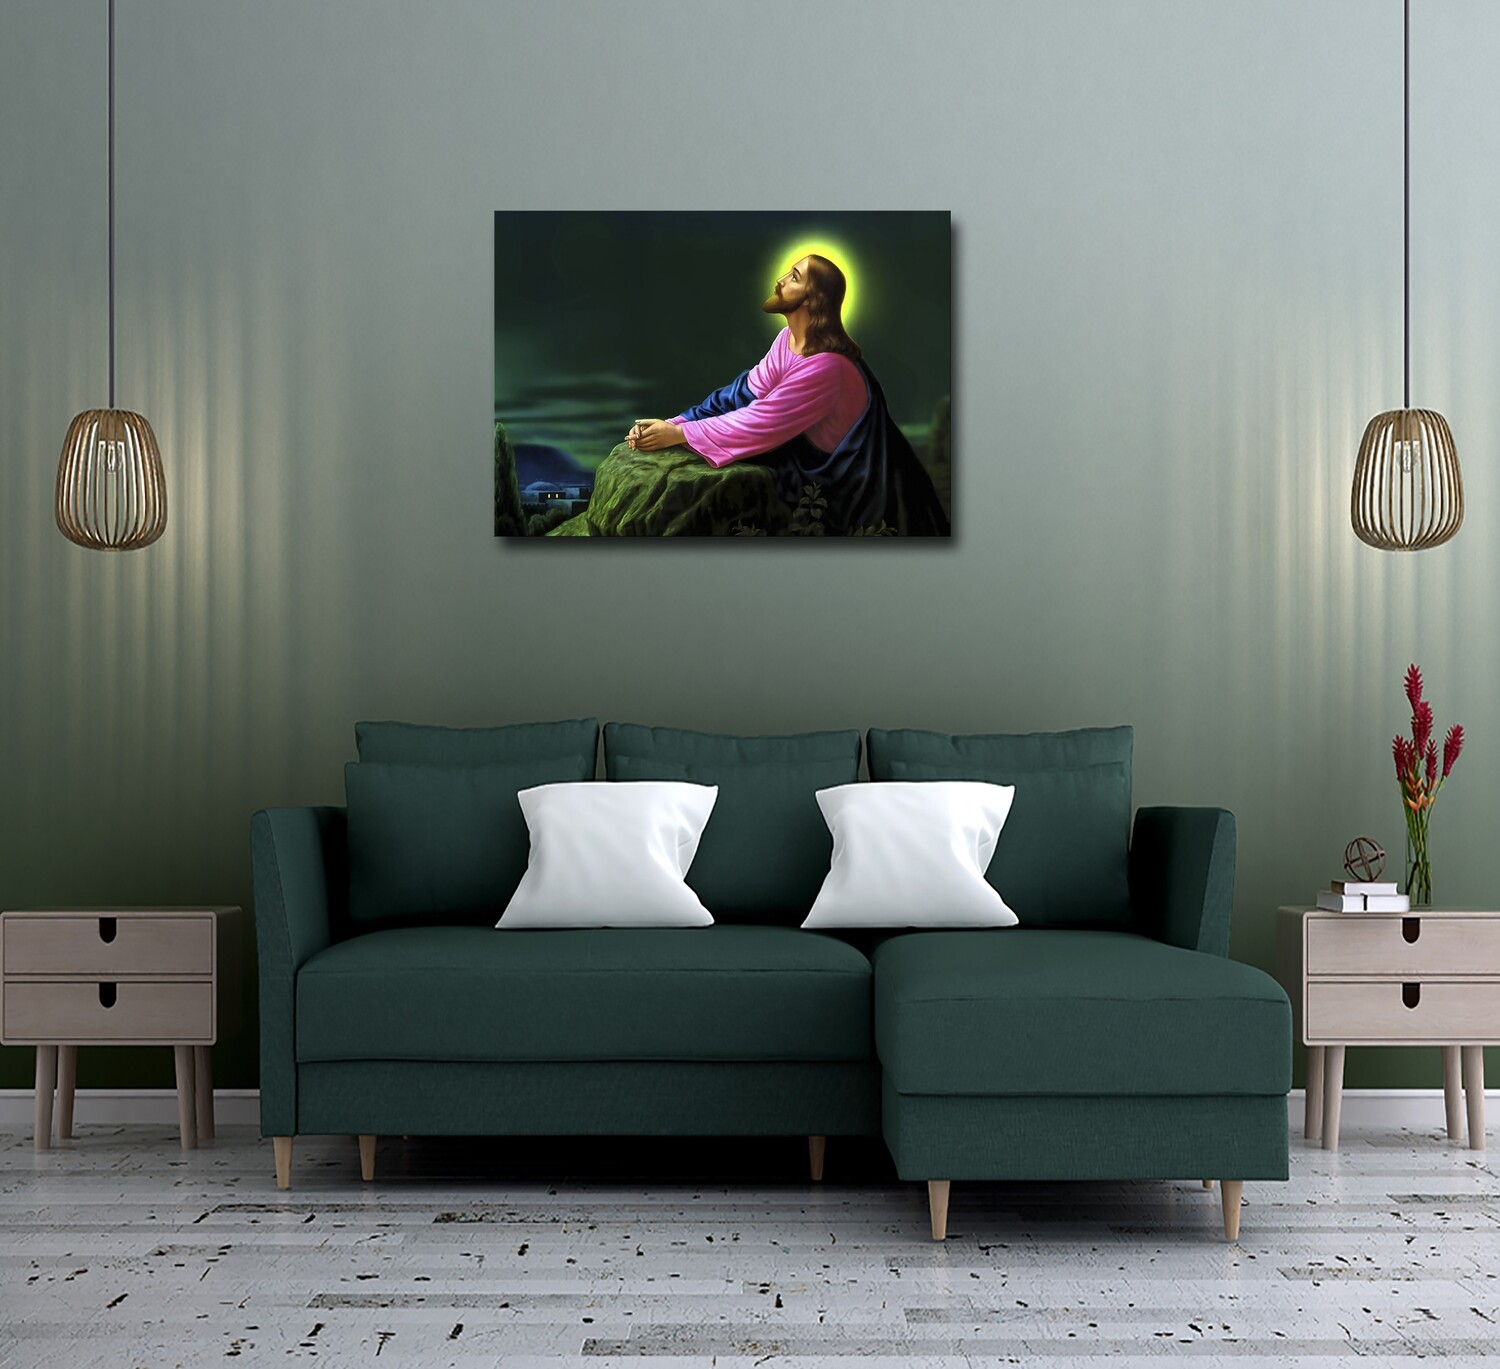 Jesus Prayer Painting -Frameless Christian Wallart - Jesus Picture Printed on Acrylic Glass-Aluminium Float Framed and Ready To Hang